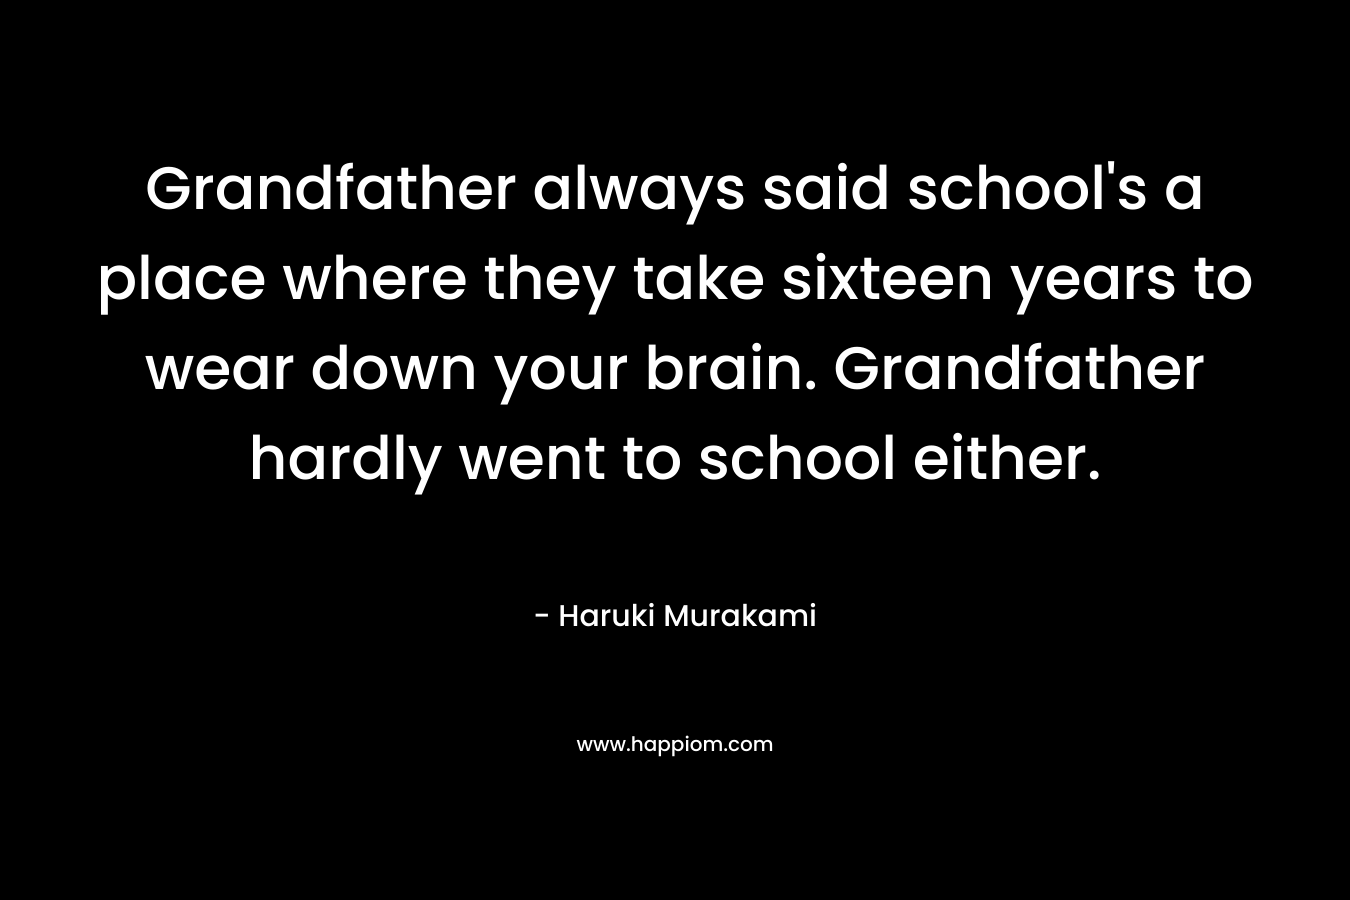 Grandfather always said school’s a place where they take sixteen years to wear down your brain. Grandfather hardly went to school either. – Haruki Murakami